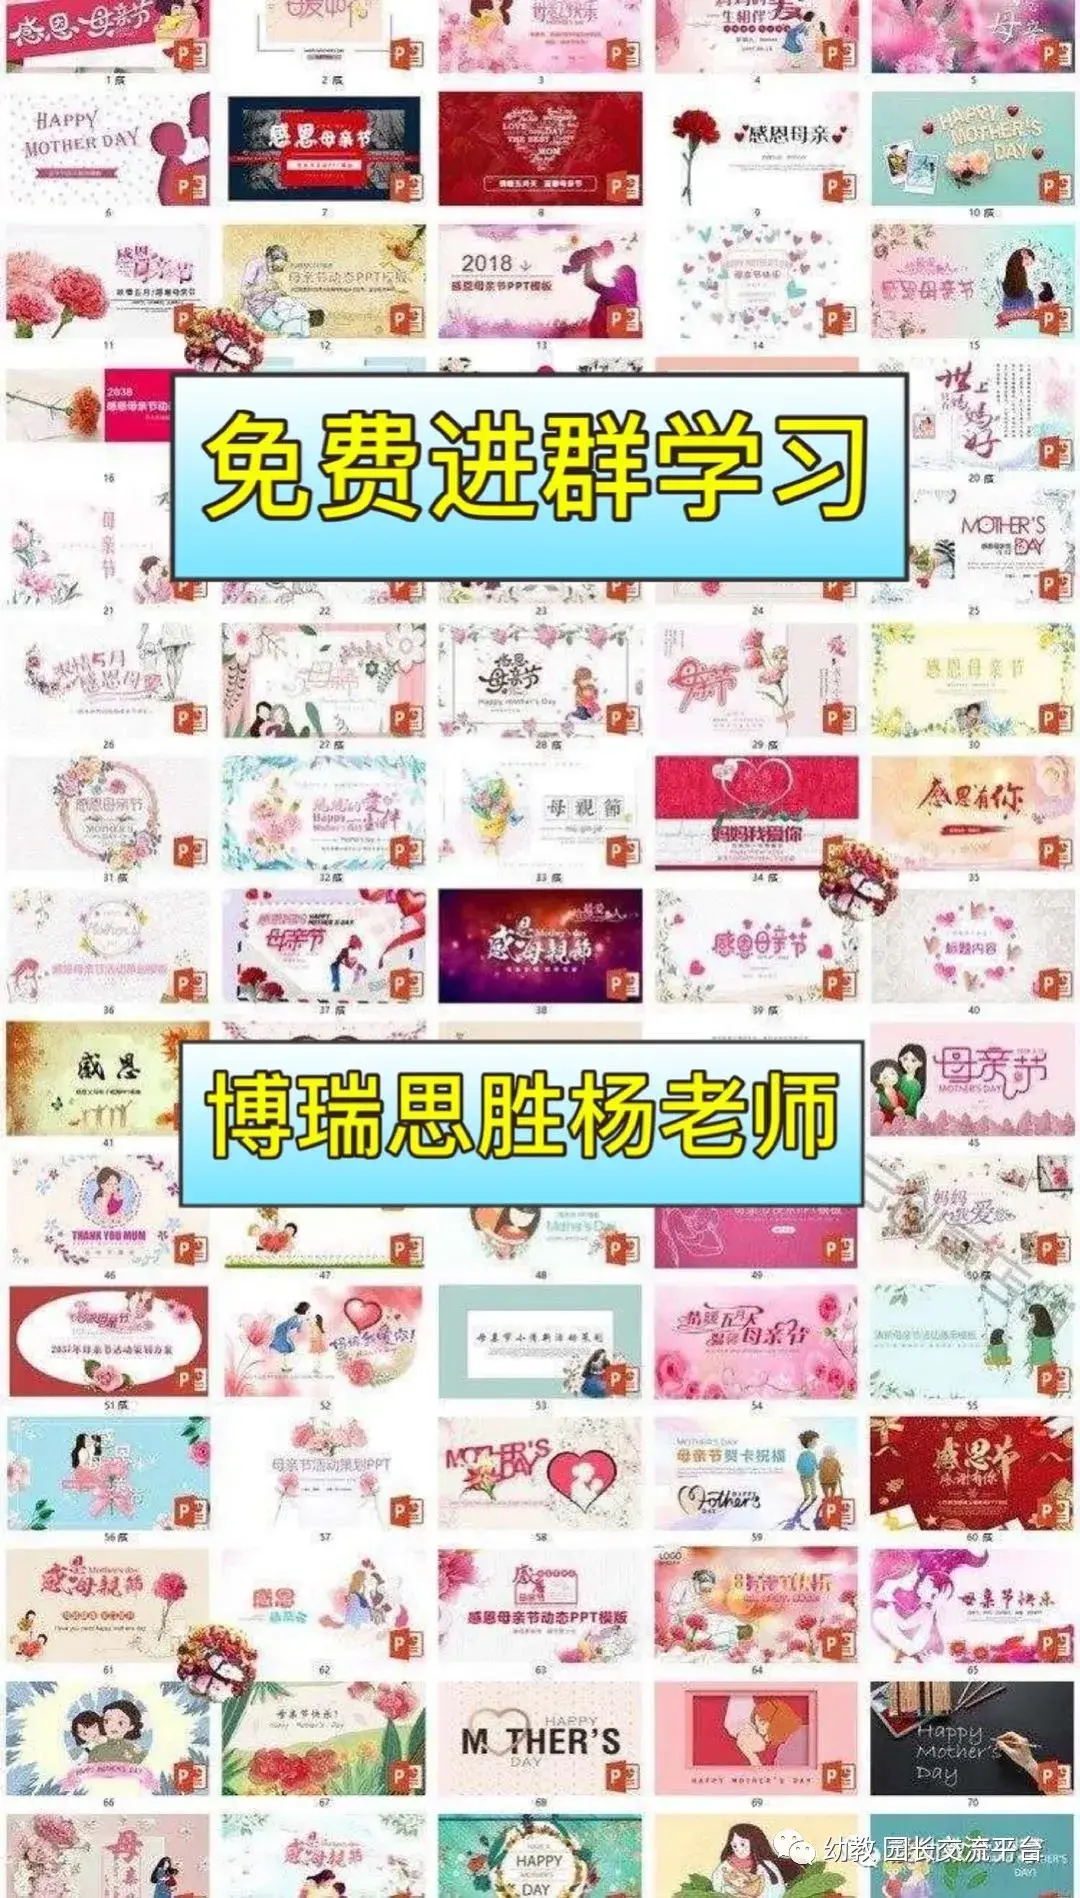 340 sets of Mother's Day PPT/Dragon Boat Festival PPT/Father's Day PPT for kindergartens, free gifts